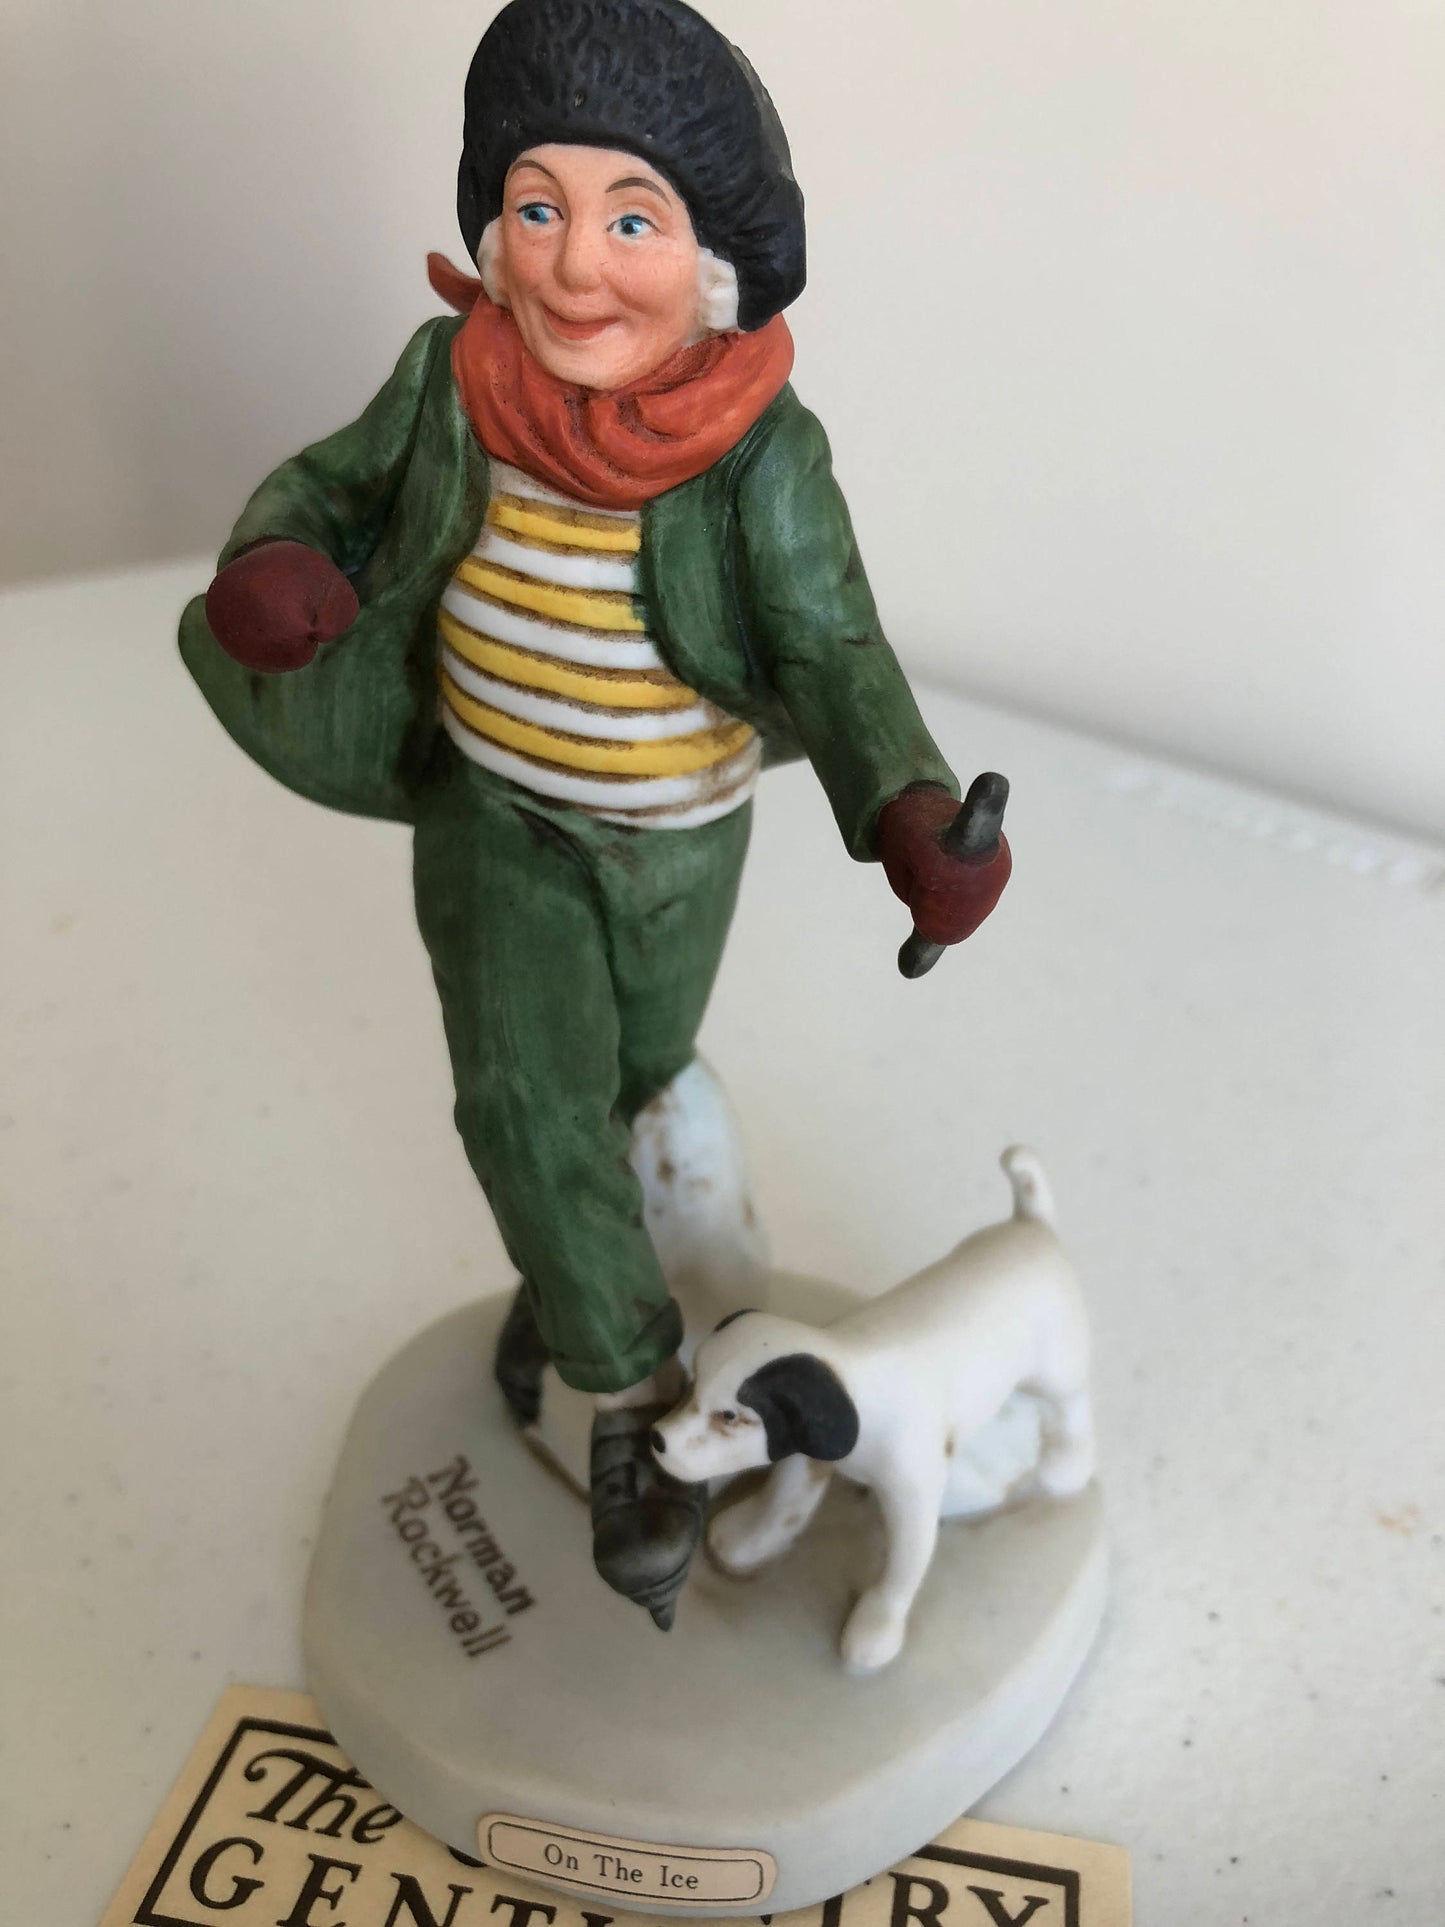 Norman Rockwell, "On The Ice". Limited Edition of 7500, Vintage 1982, Figurine